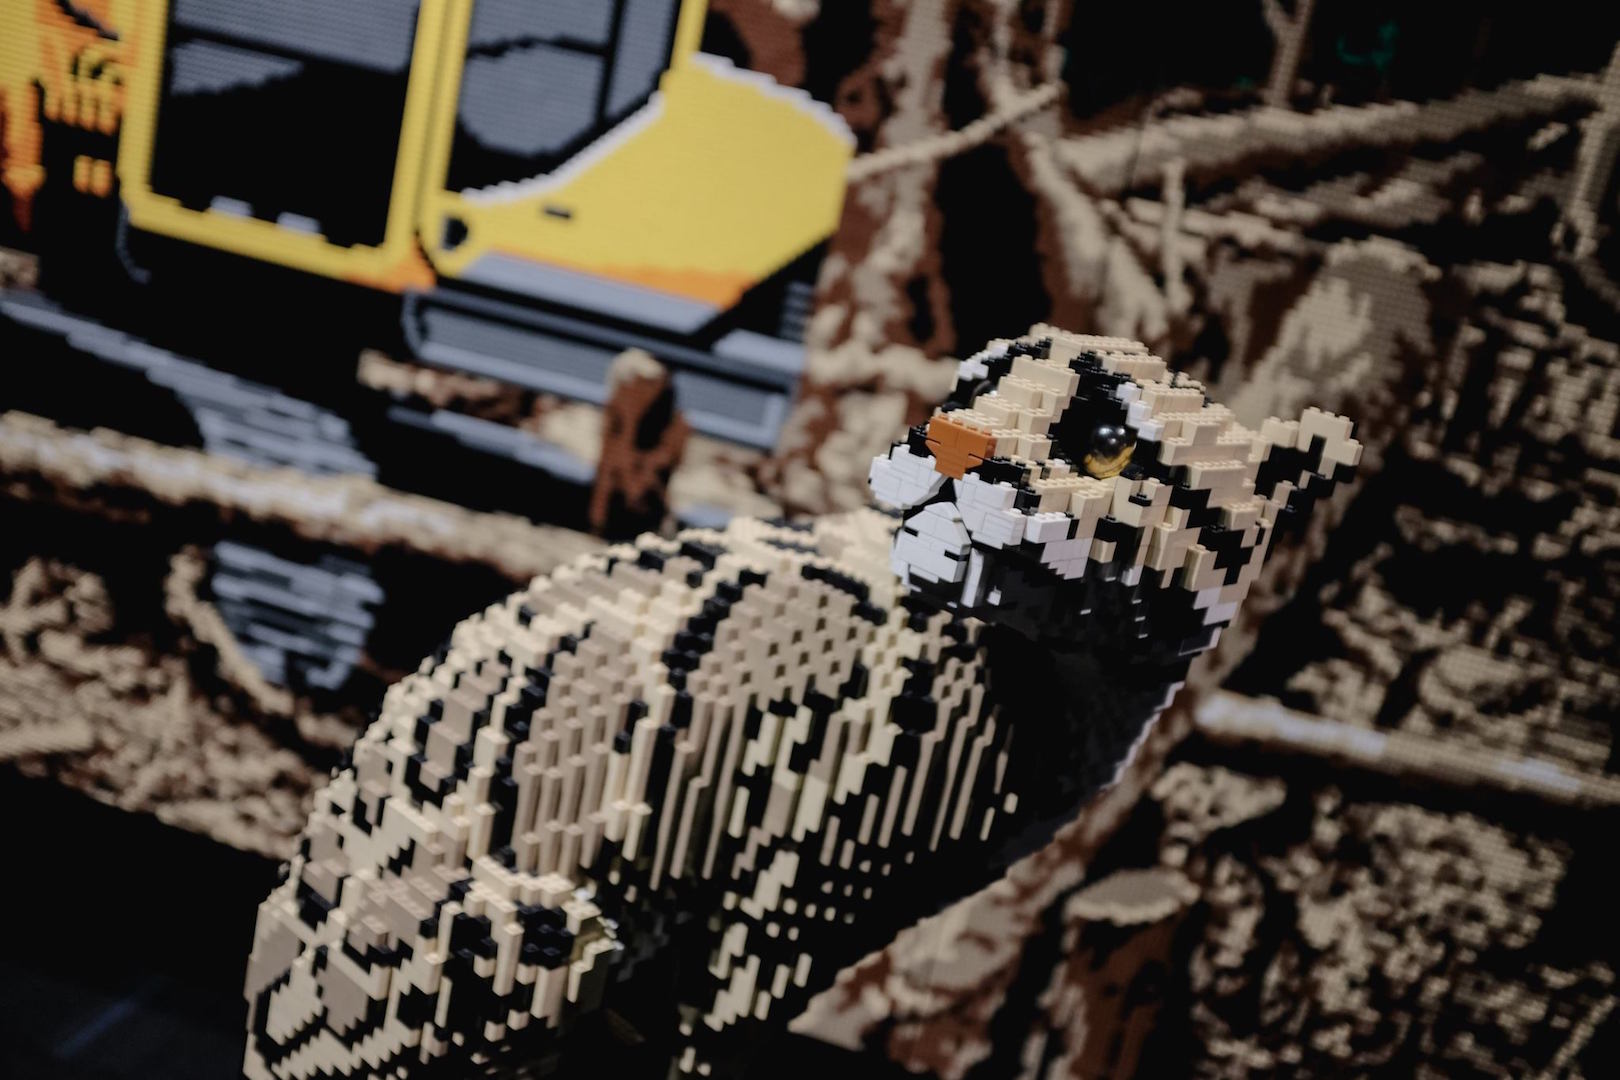 Sculpture of a snow leopard made of LEGO pieces in Sean Kenney’s Art Made with LEGO® Bricks